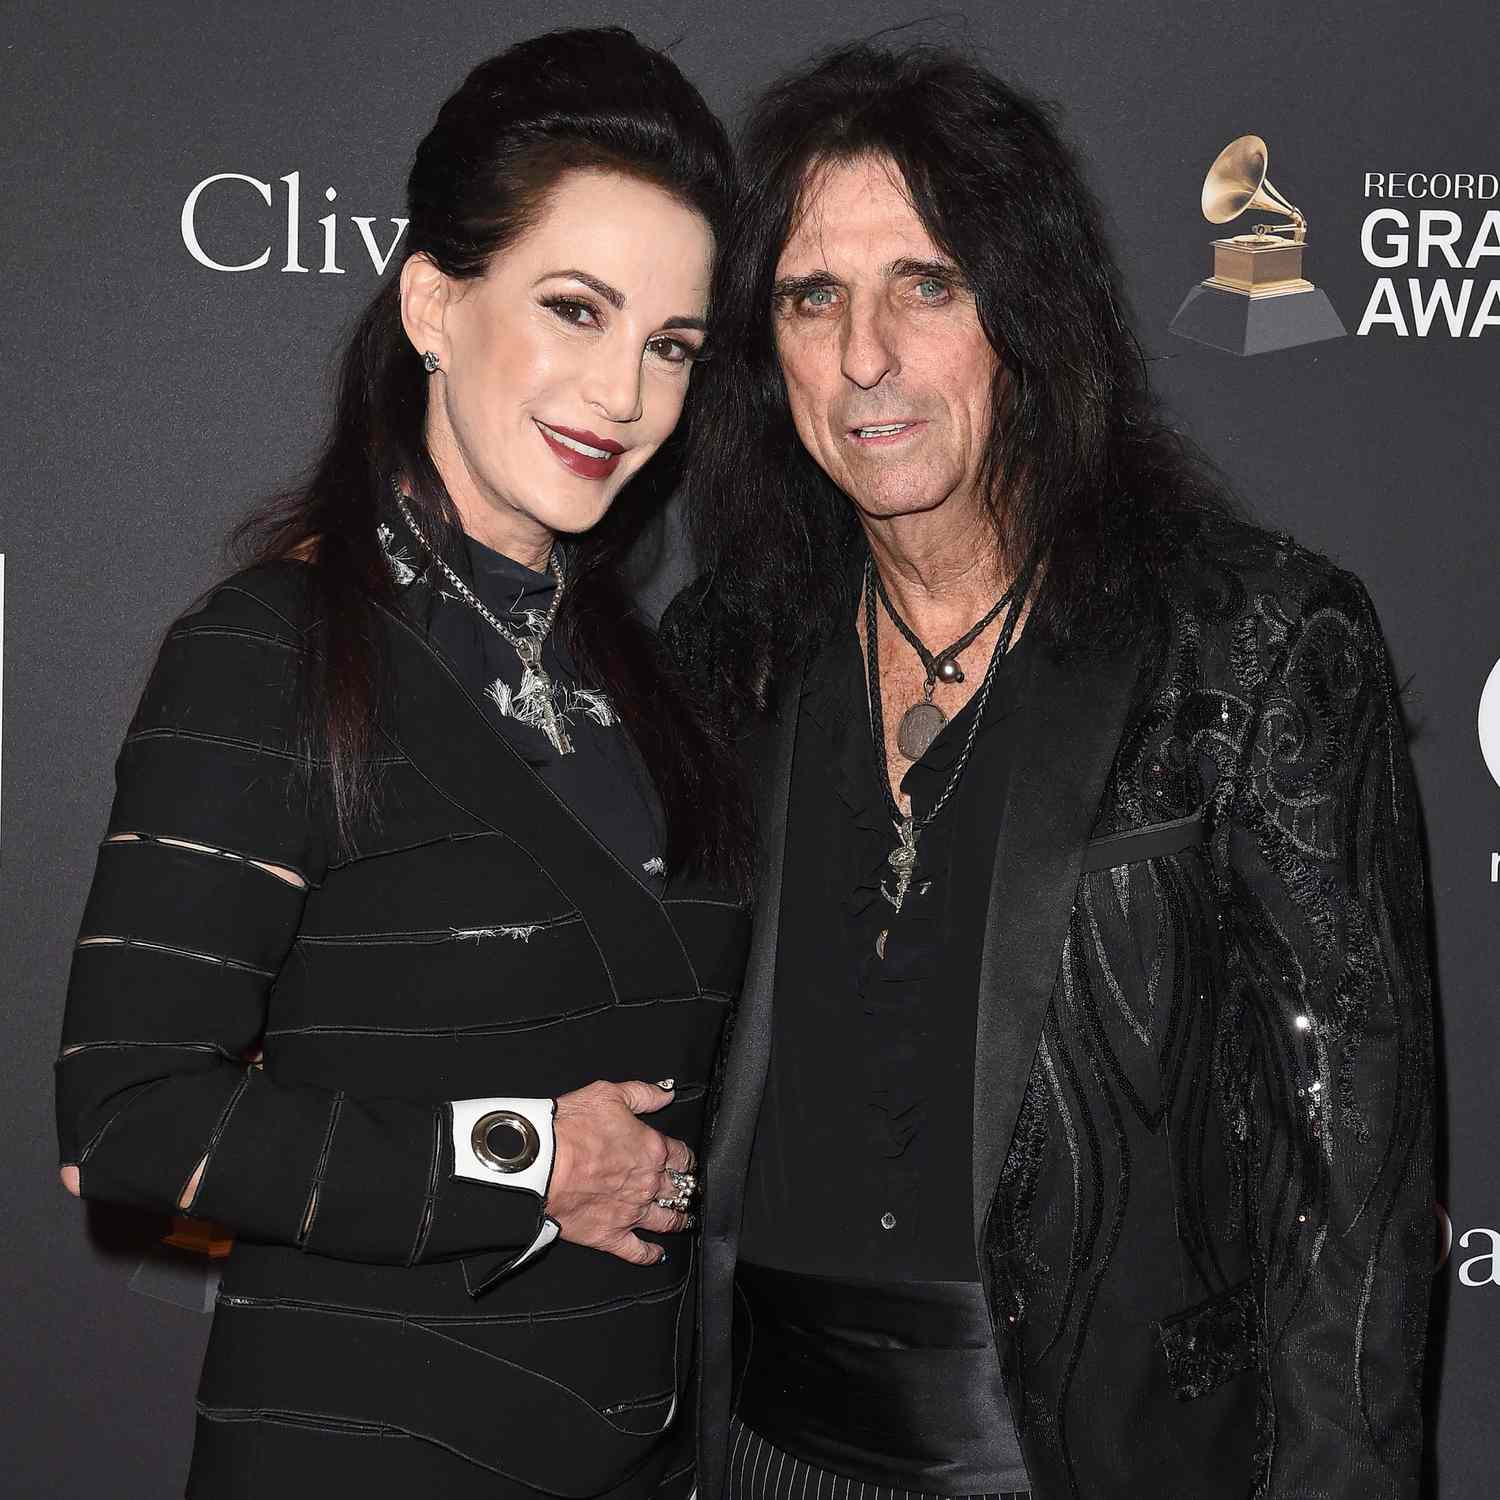 Alice Cooper and Wife Sheryl Goddard Don't Have a Death Pact